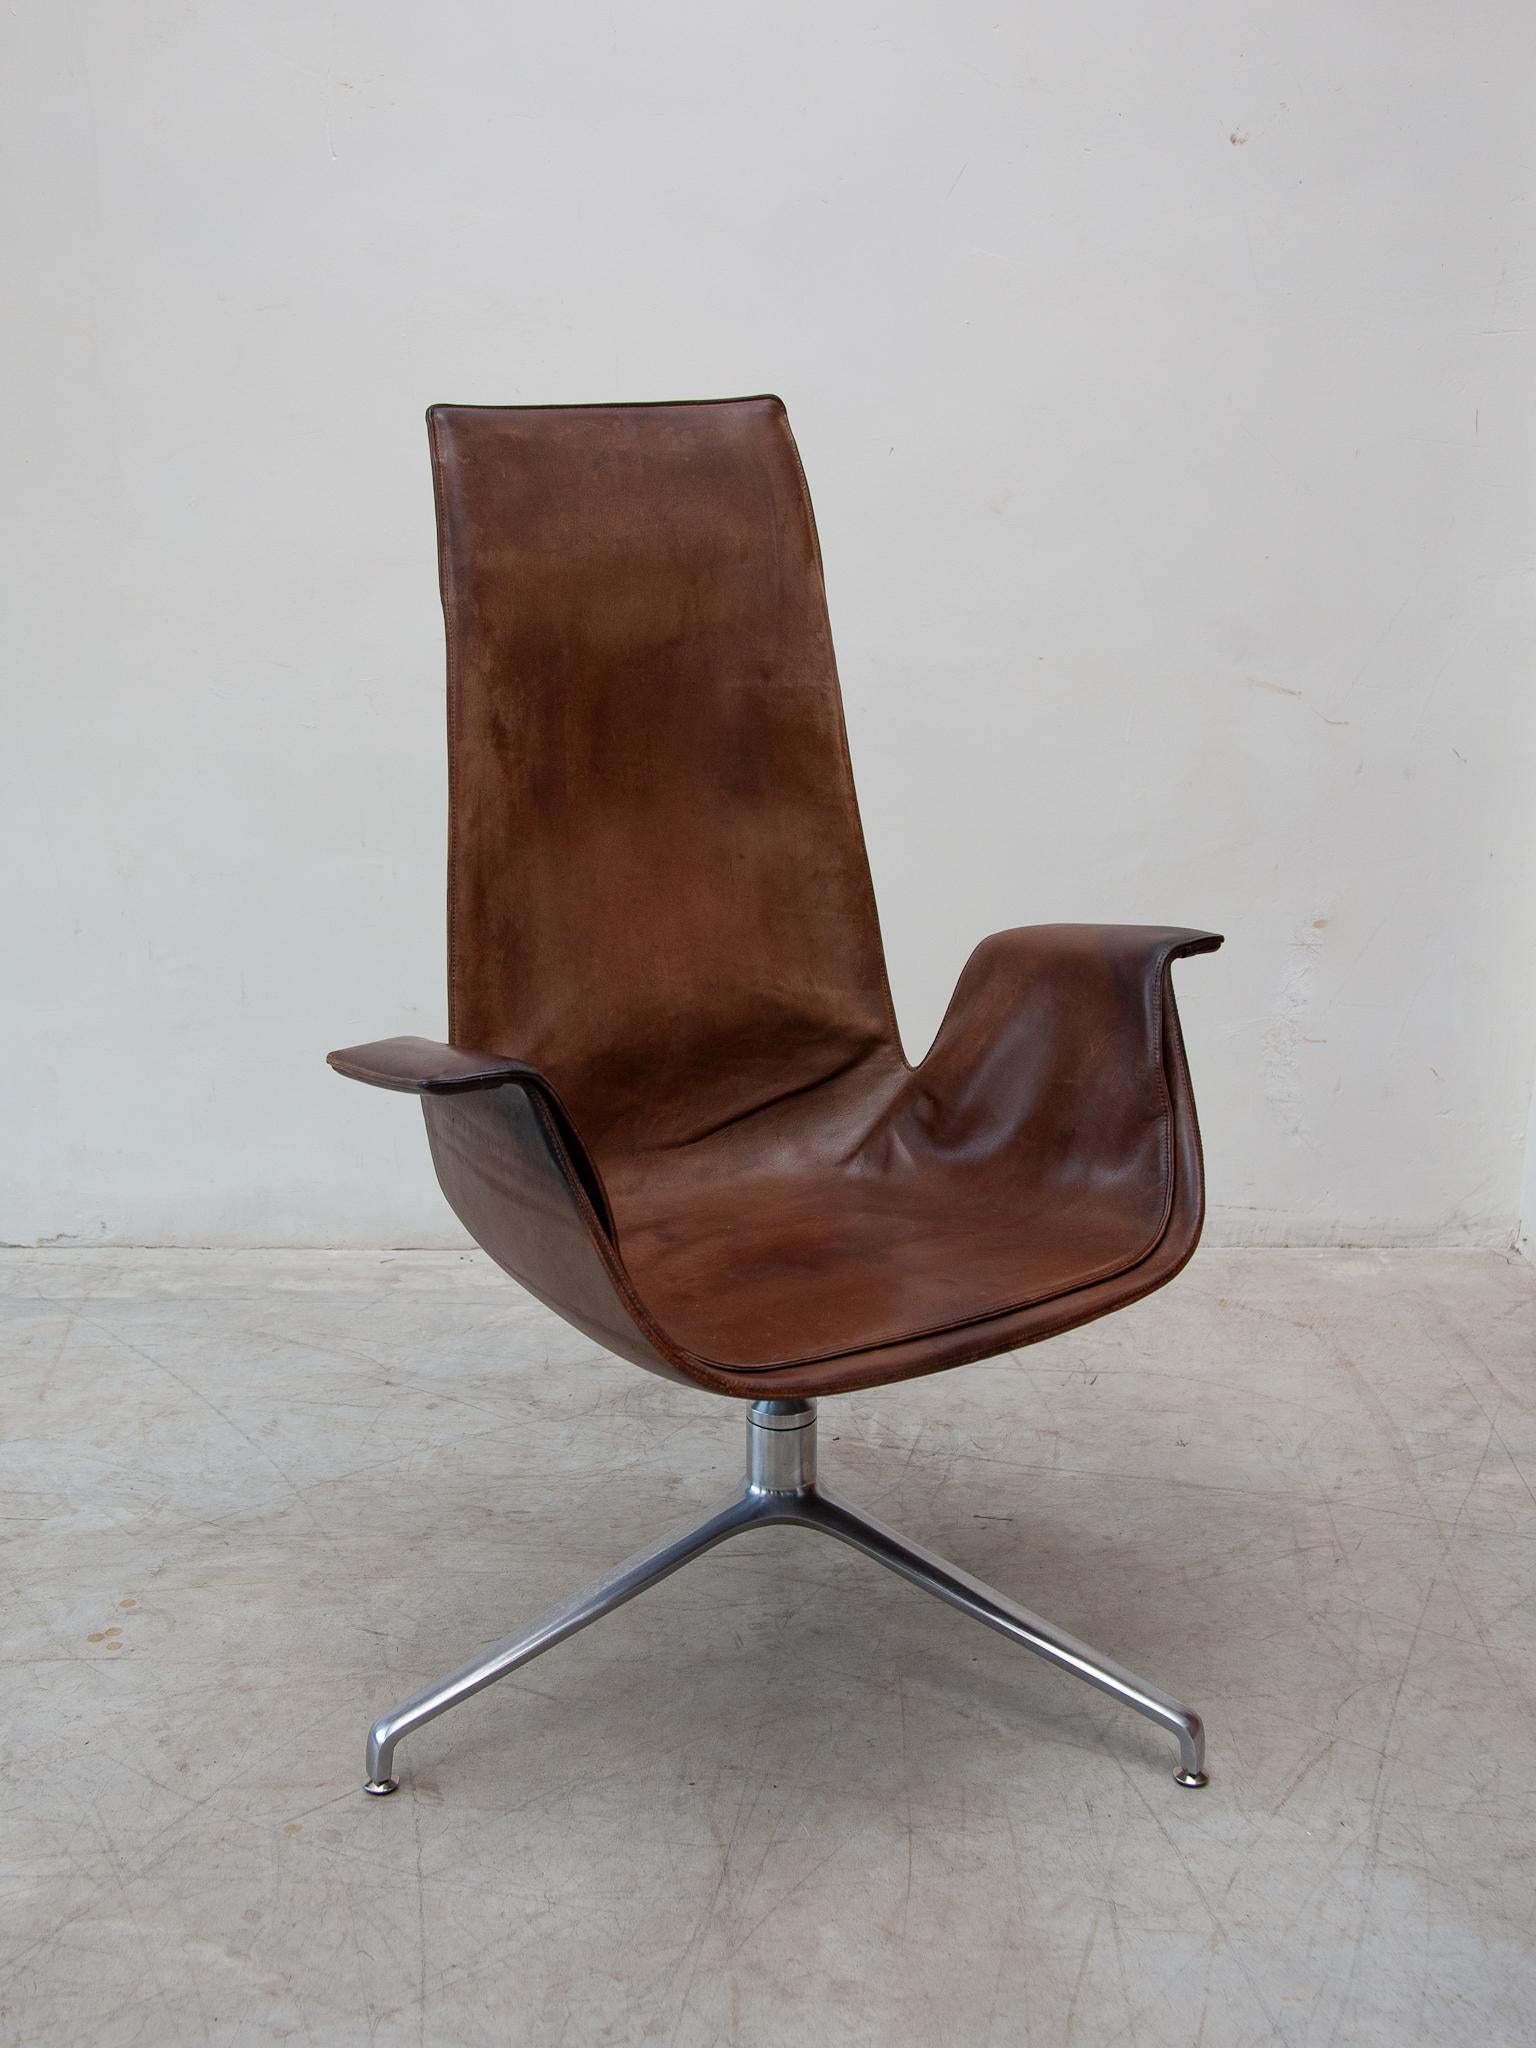 Fabricius & Kastholm FK6725 Desk, Lounge Chair in Brown Leather, Kill For Sale 8